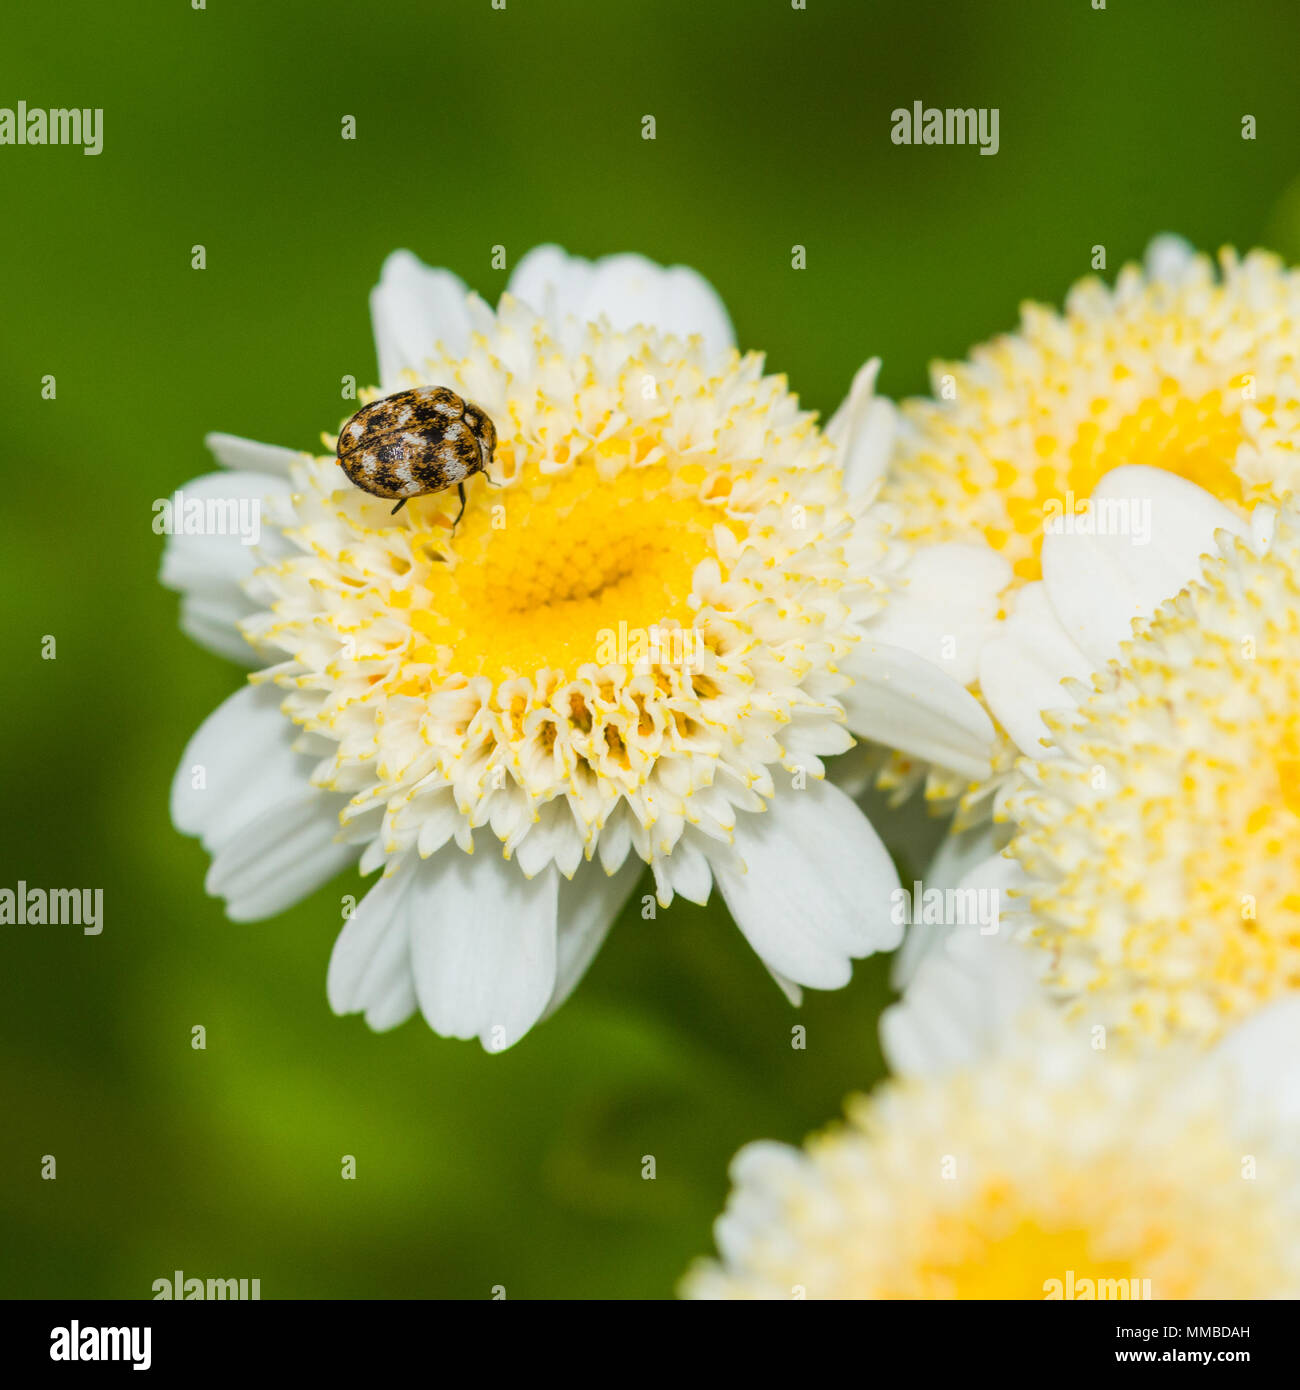 A macro shot of a beetle sitting on a feverfew bloom. Stock Photo